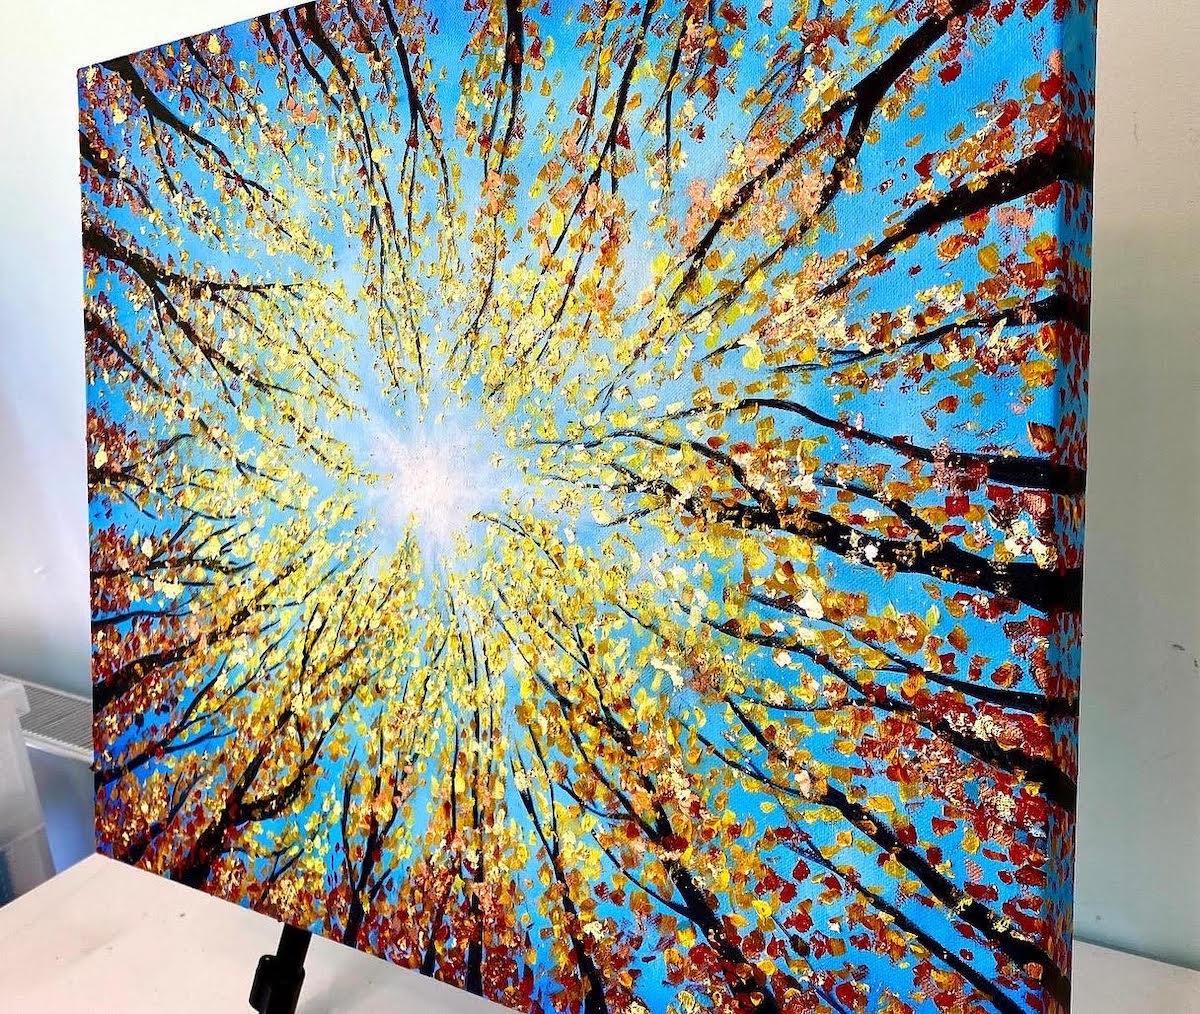 Reach for the Light by Sophia Chalklen, Original painting, Landscape, Tree art - Contemporary Painting by Sophia Chalklen 